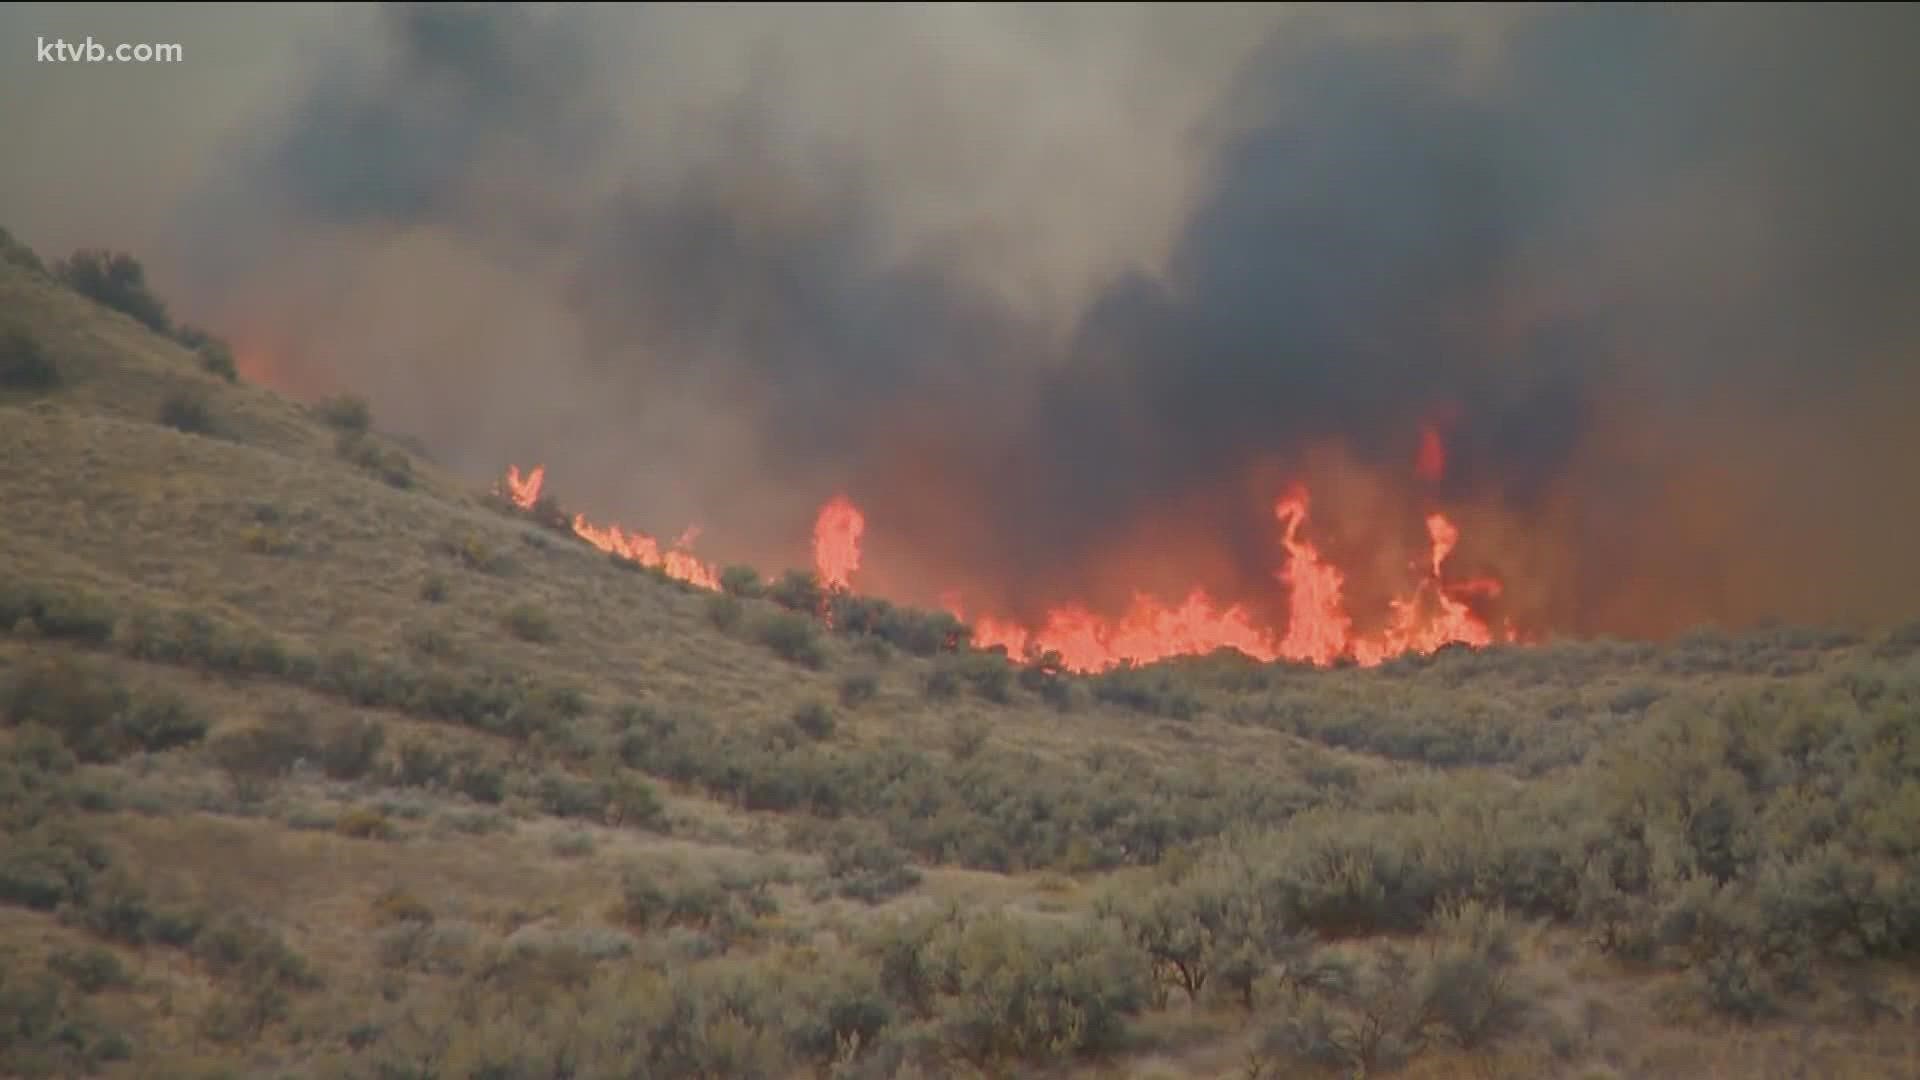 As we recognize “Wildfire Awareness Month,” and the 2022 fire season nears, KTVB looks at the innovative ways Avimor is trying to prevent and protect against fires.